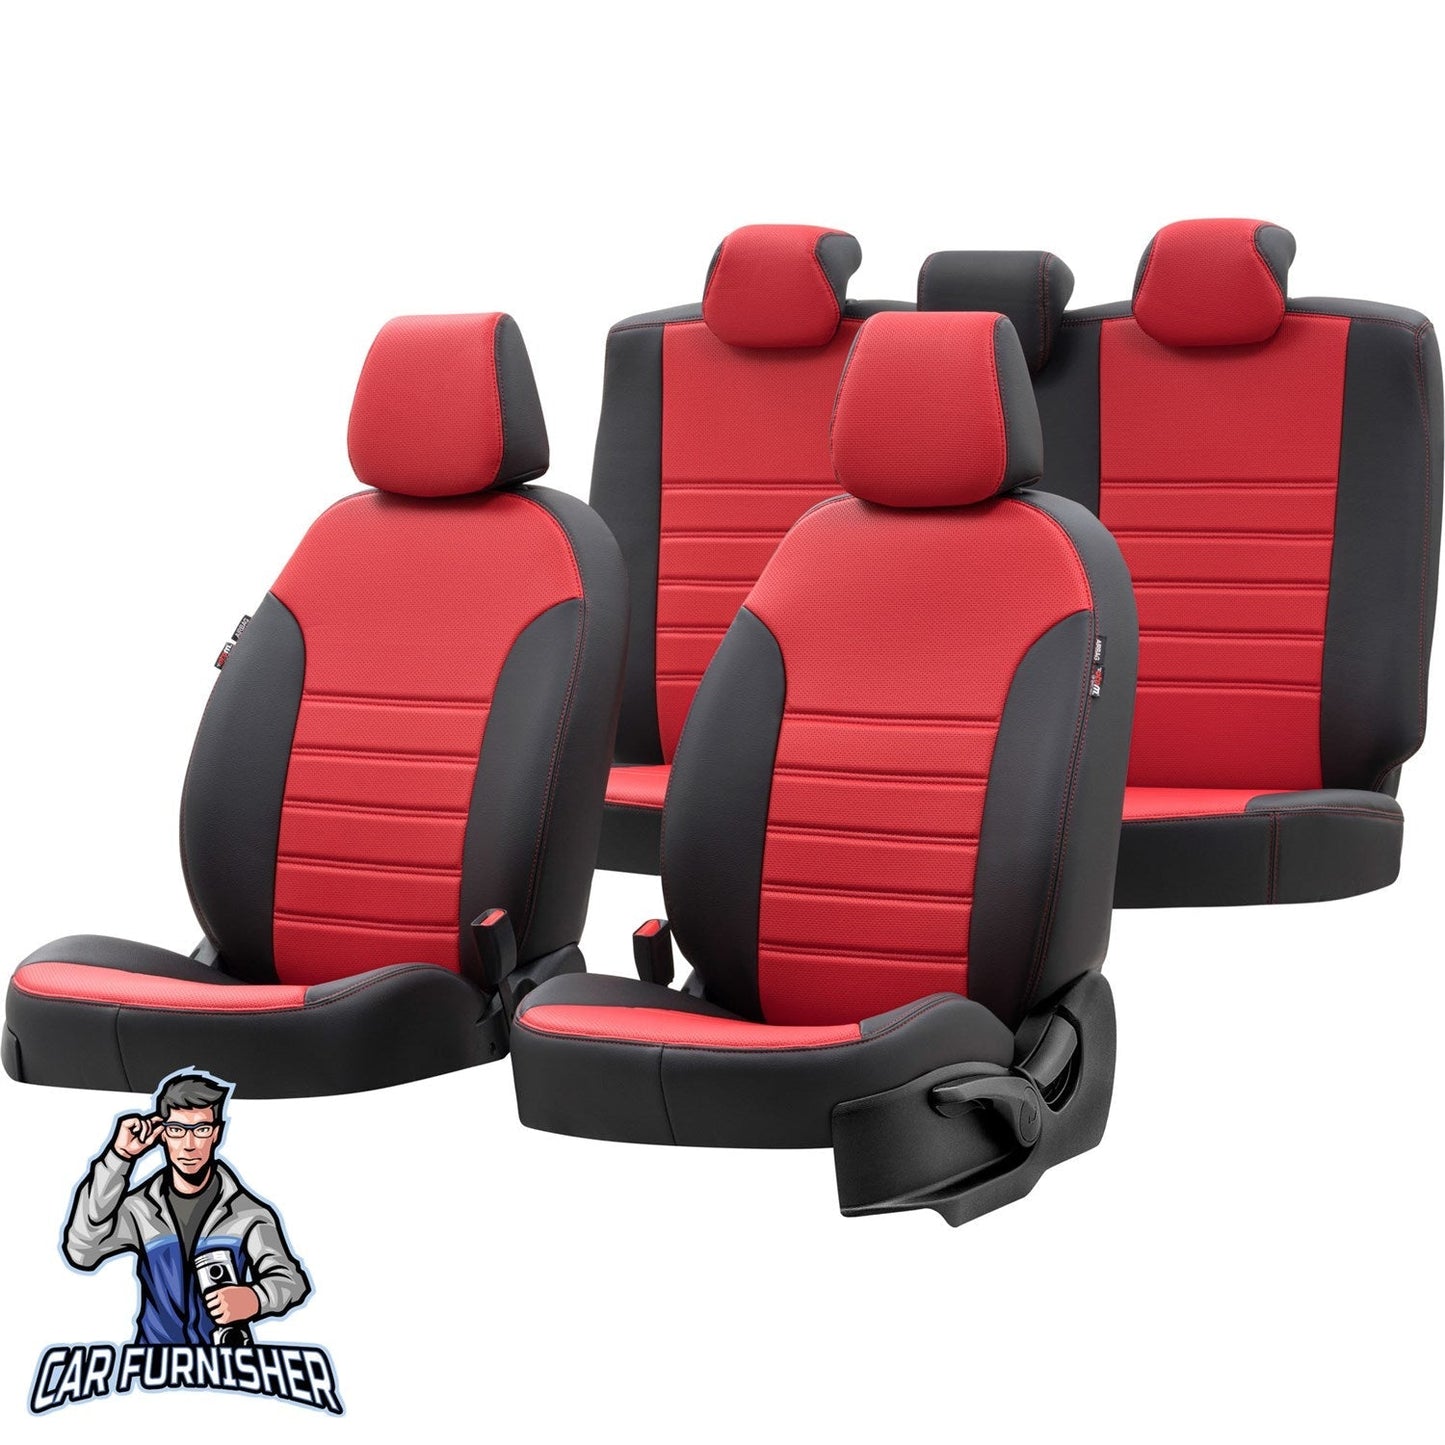 Fiat Fullback Seat Covers New York Leather Design Red Leather